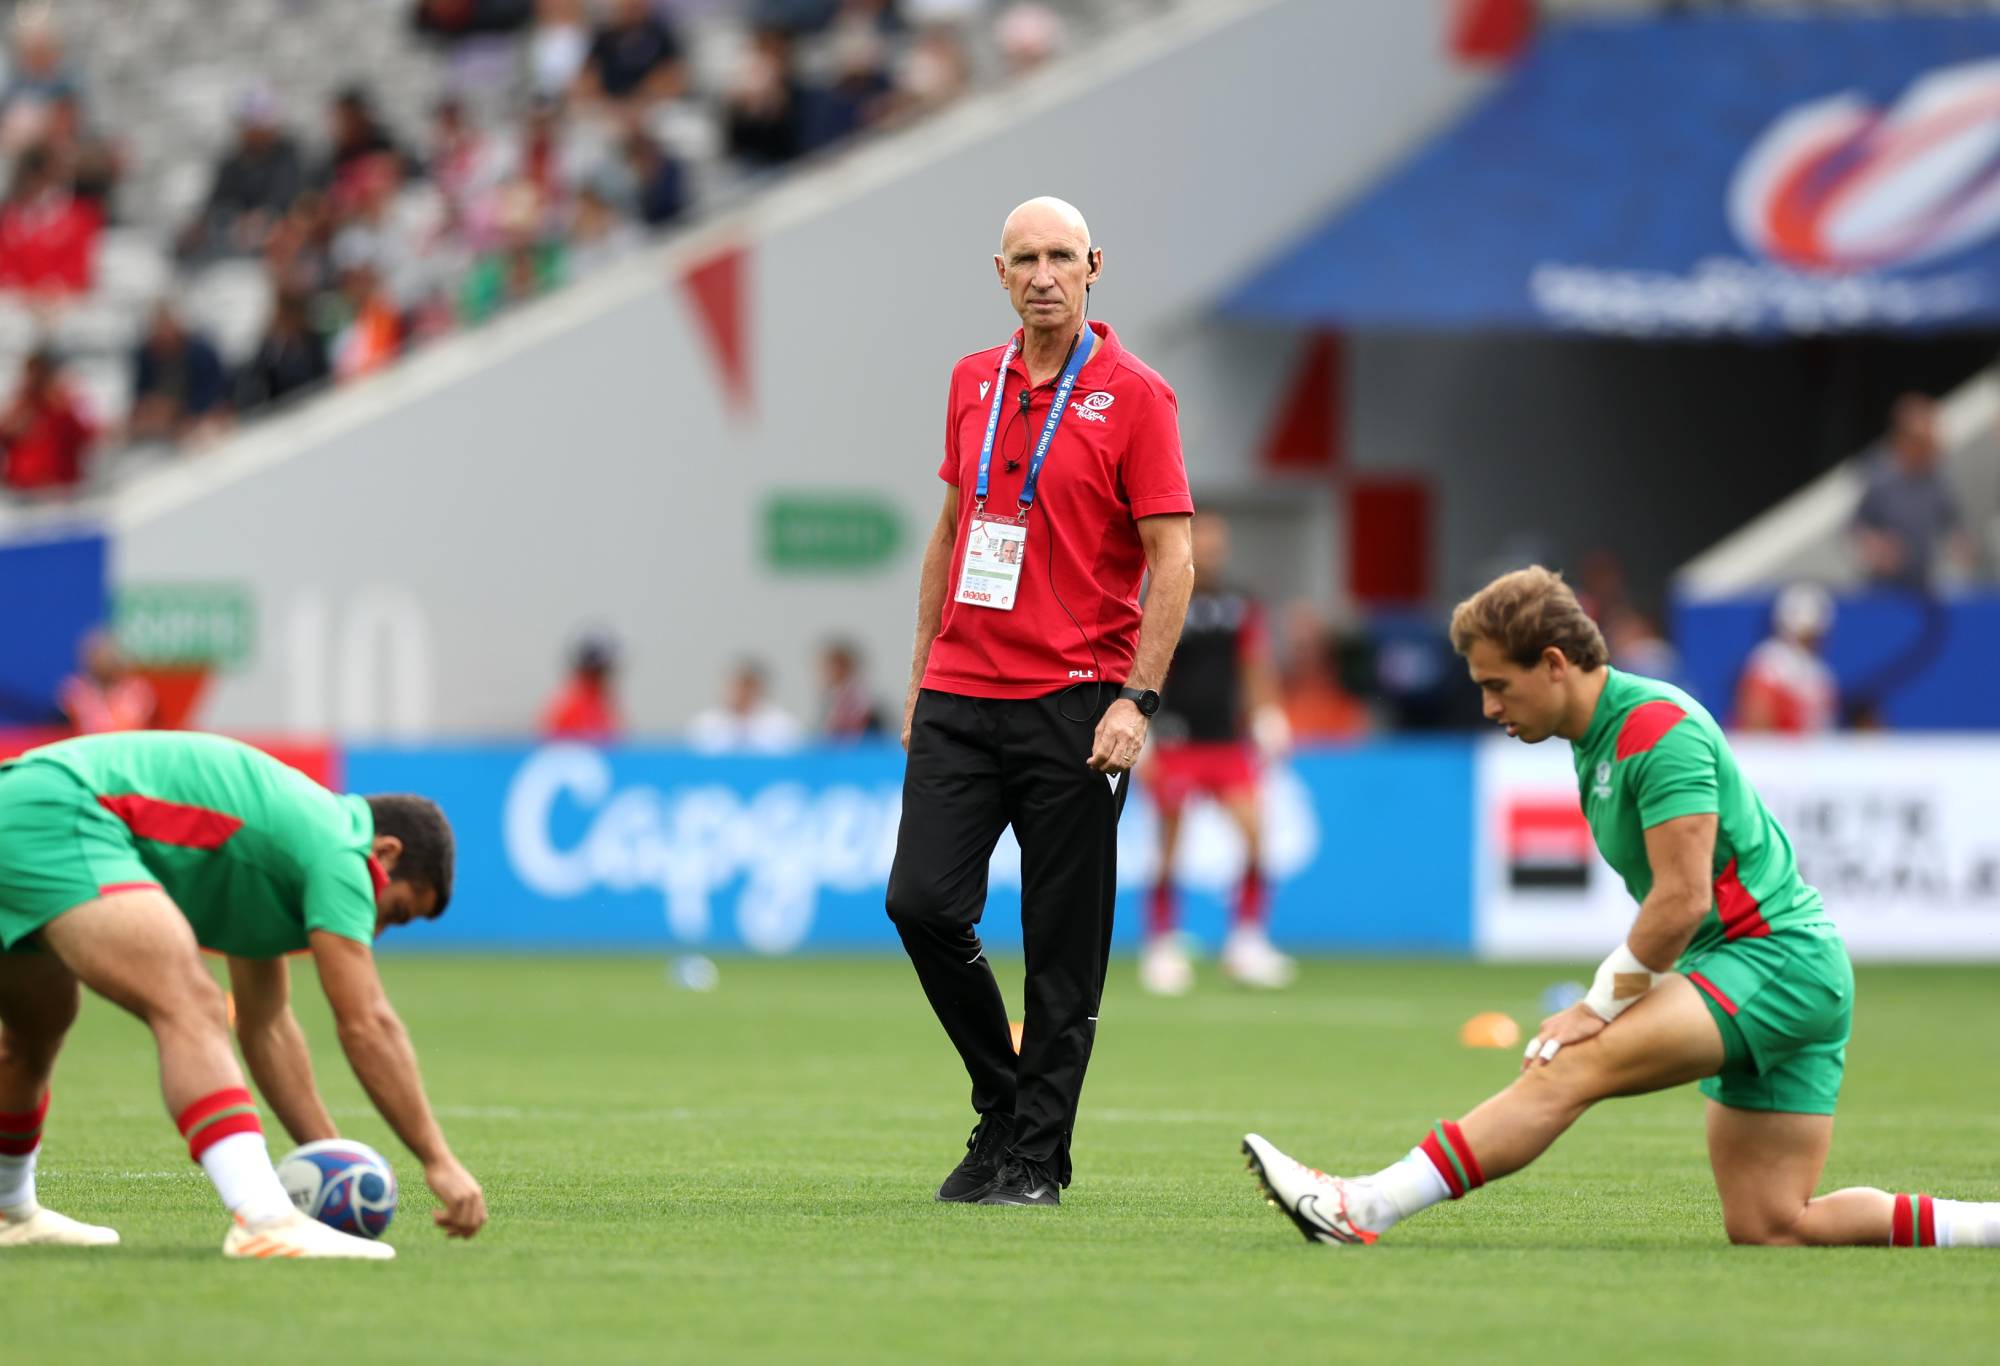 Patrice Lagisquet, Head Coach of Portugal, looks on prior to the Rugby World Cup France 2023 match between Georgia and Portugal at Stadium de Toulouse on September 23, 2023 in Toulouse, France. (Photo by Catherine Ivill/Getty Images)